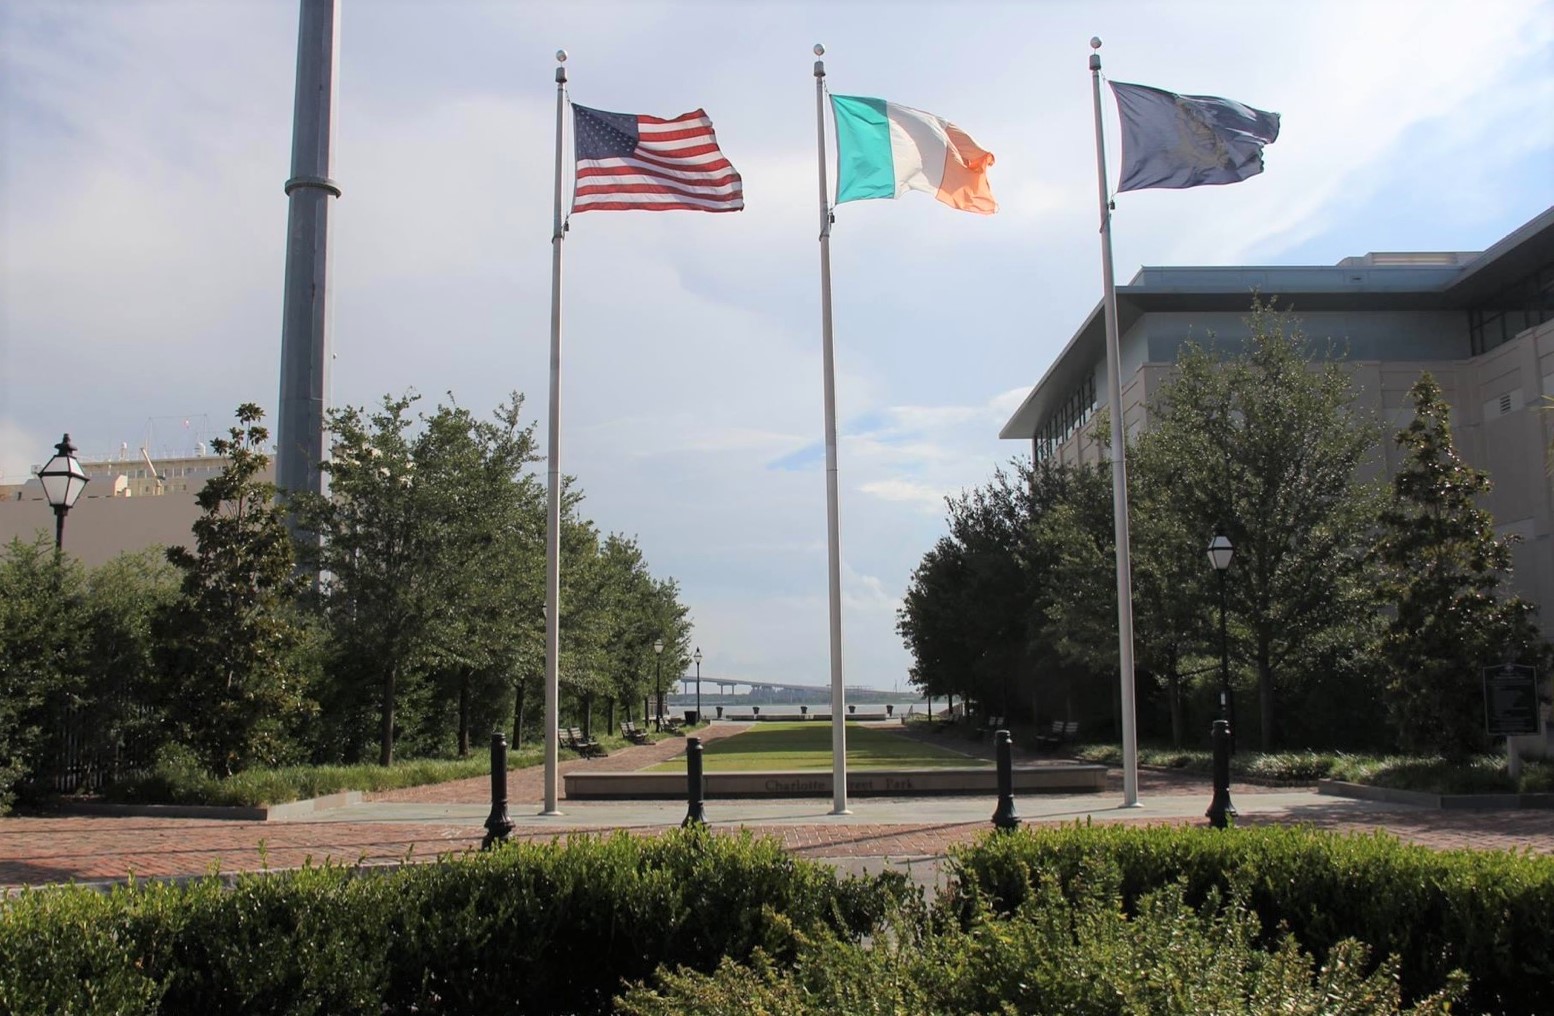 Three flags on poles outside, including for the U.S. and Ireland